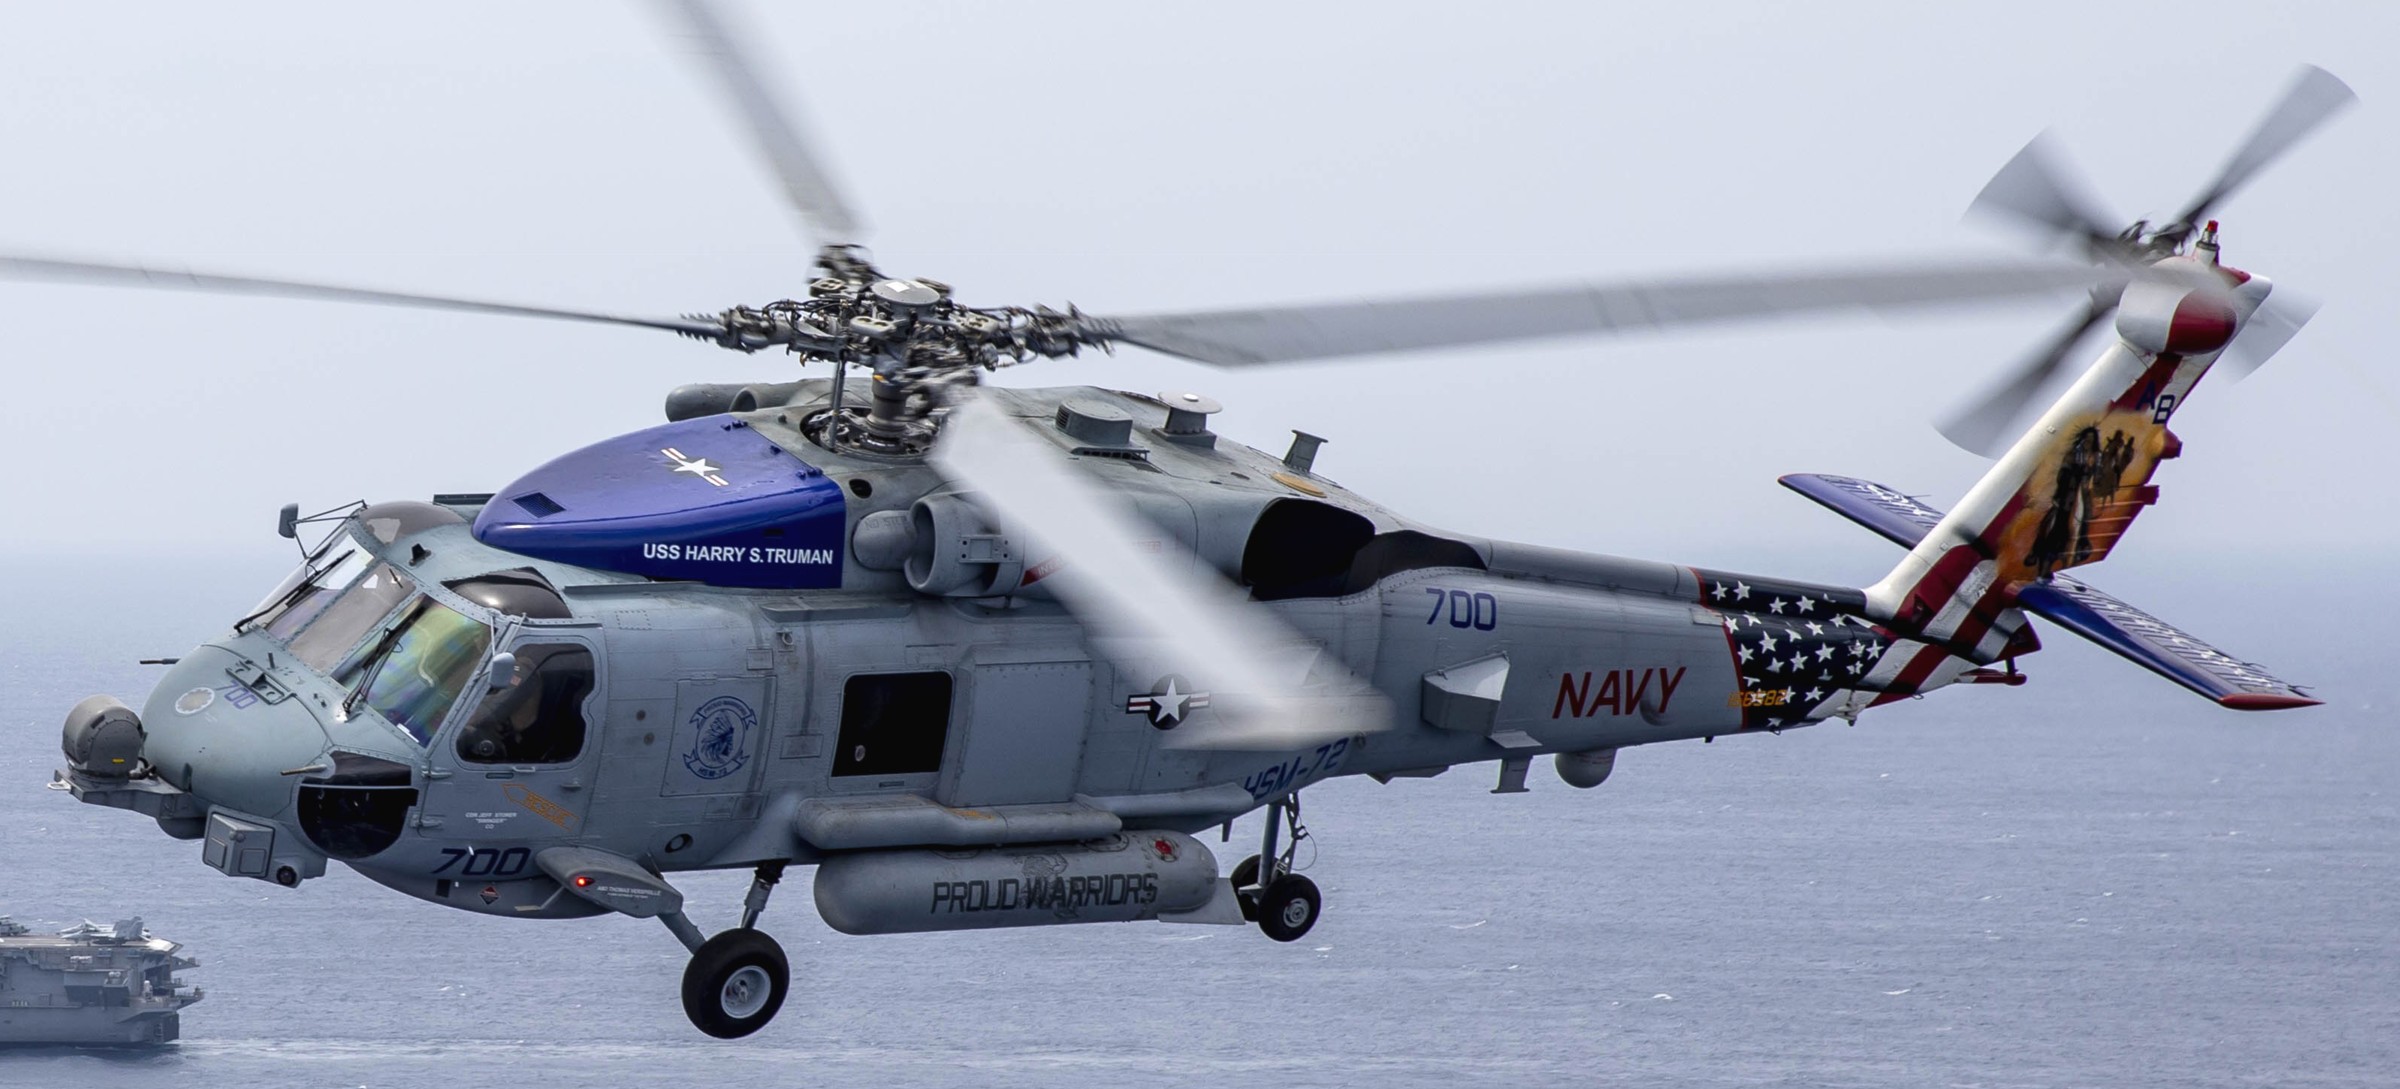 hsm-72 proud warriors helicopter maritime strike squadron us navy mh-60r seahawk 74